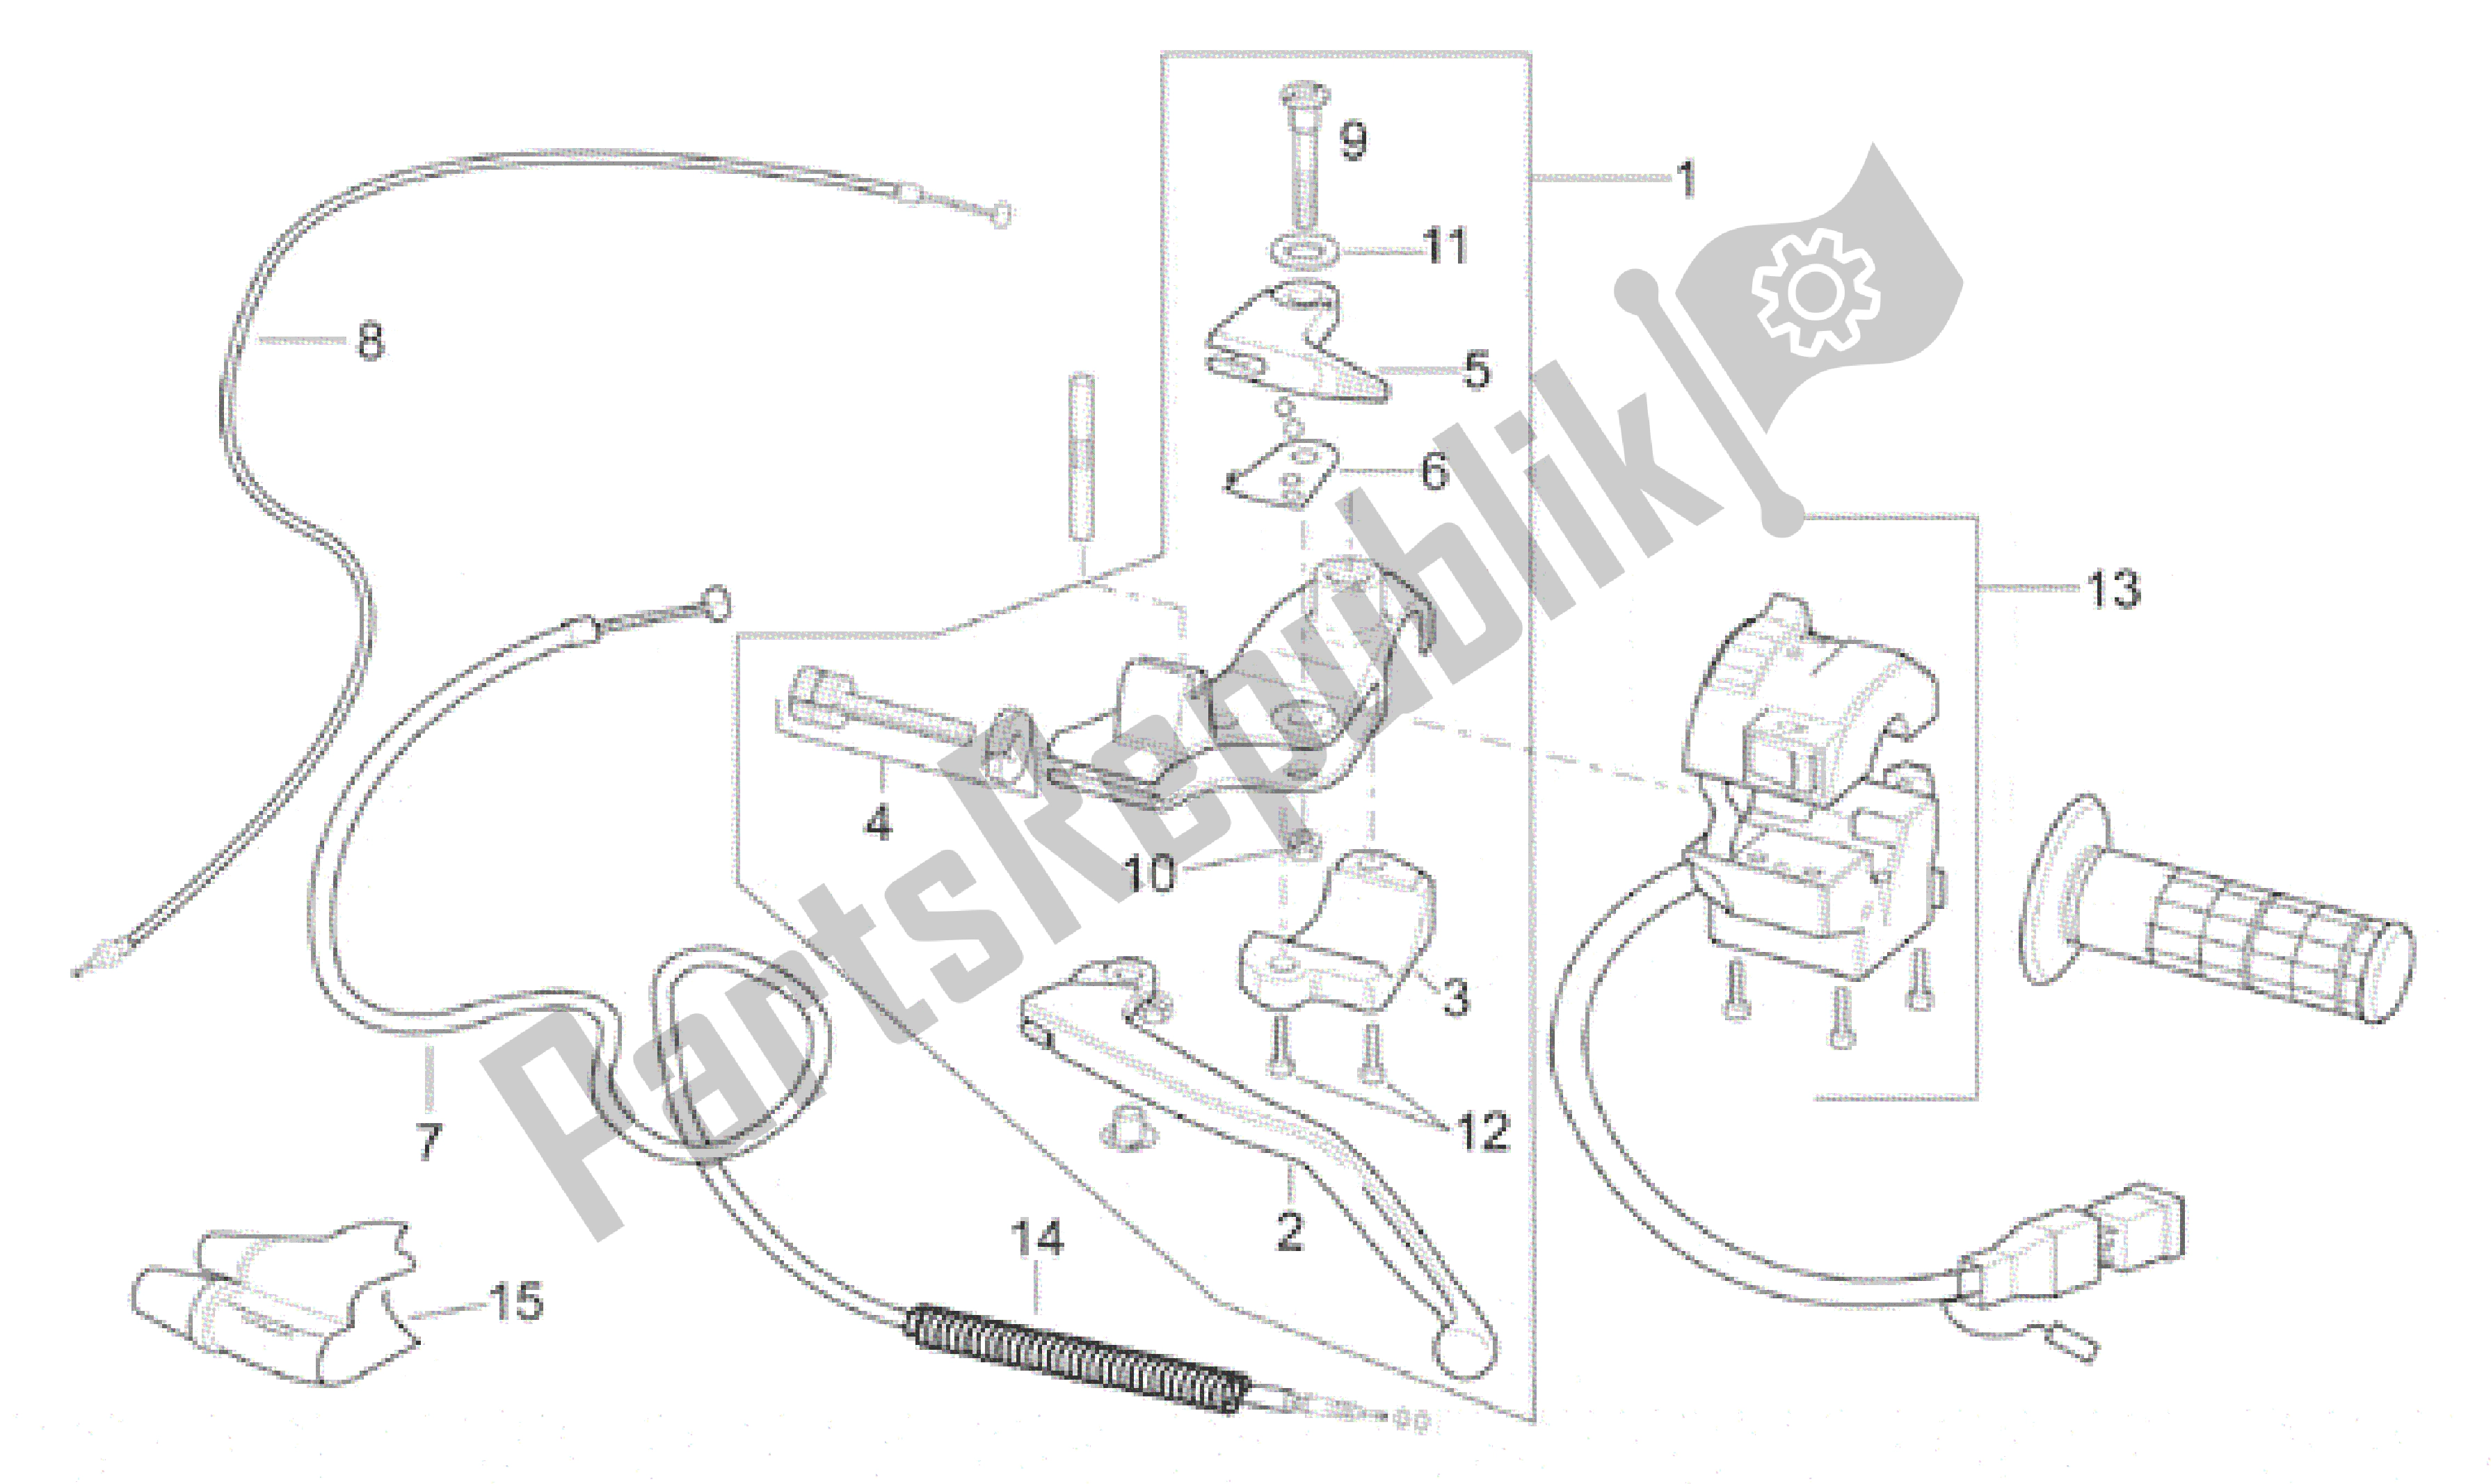 All parts for the Lh Controls of the Aprilia ETX 125 1999 - 2001